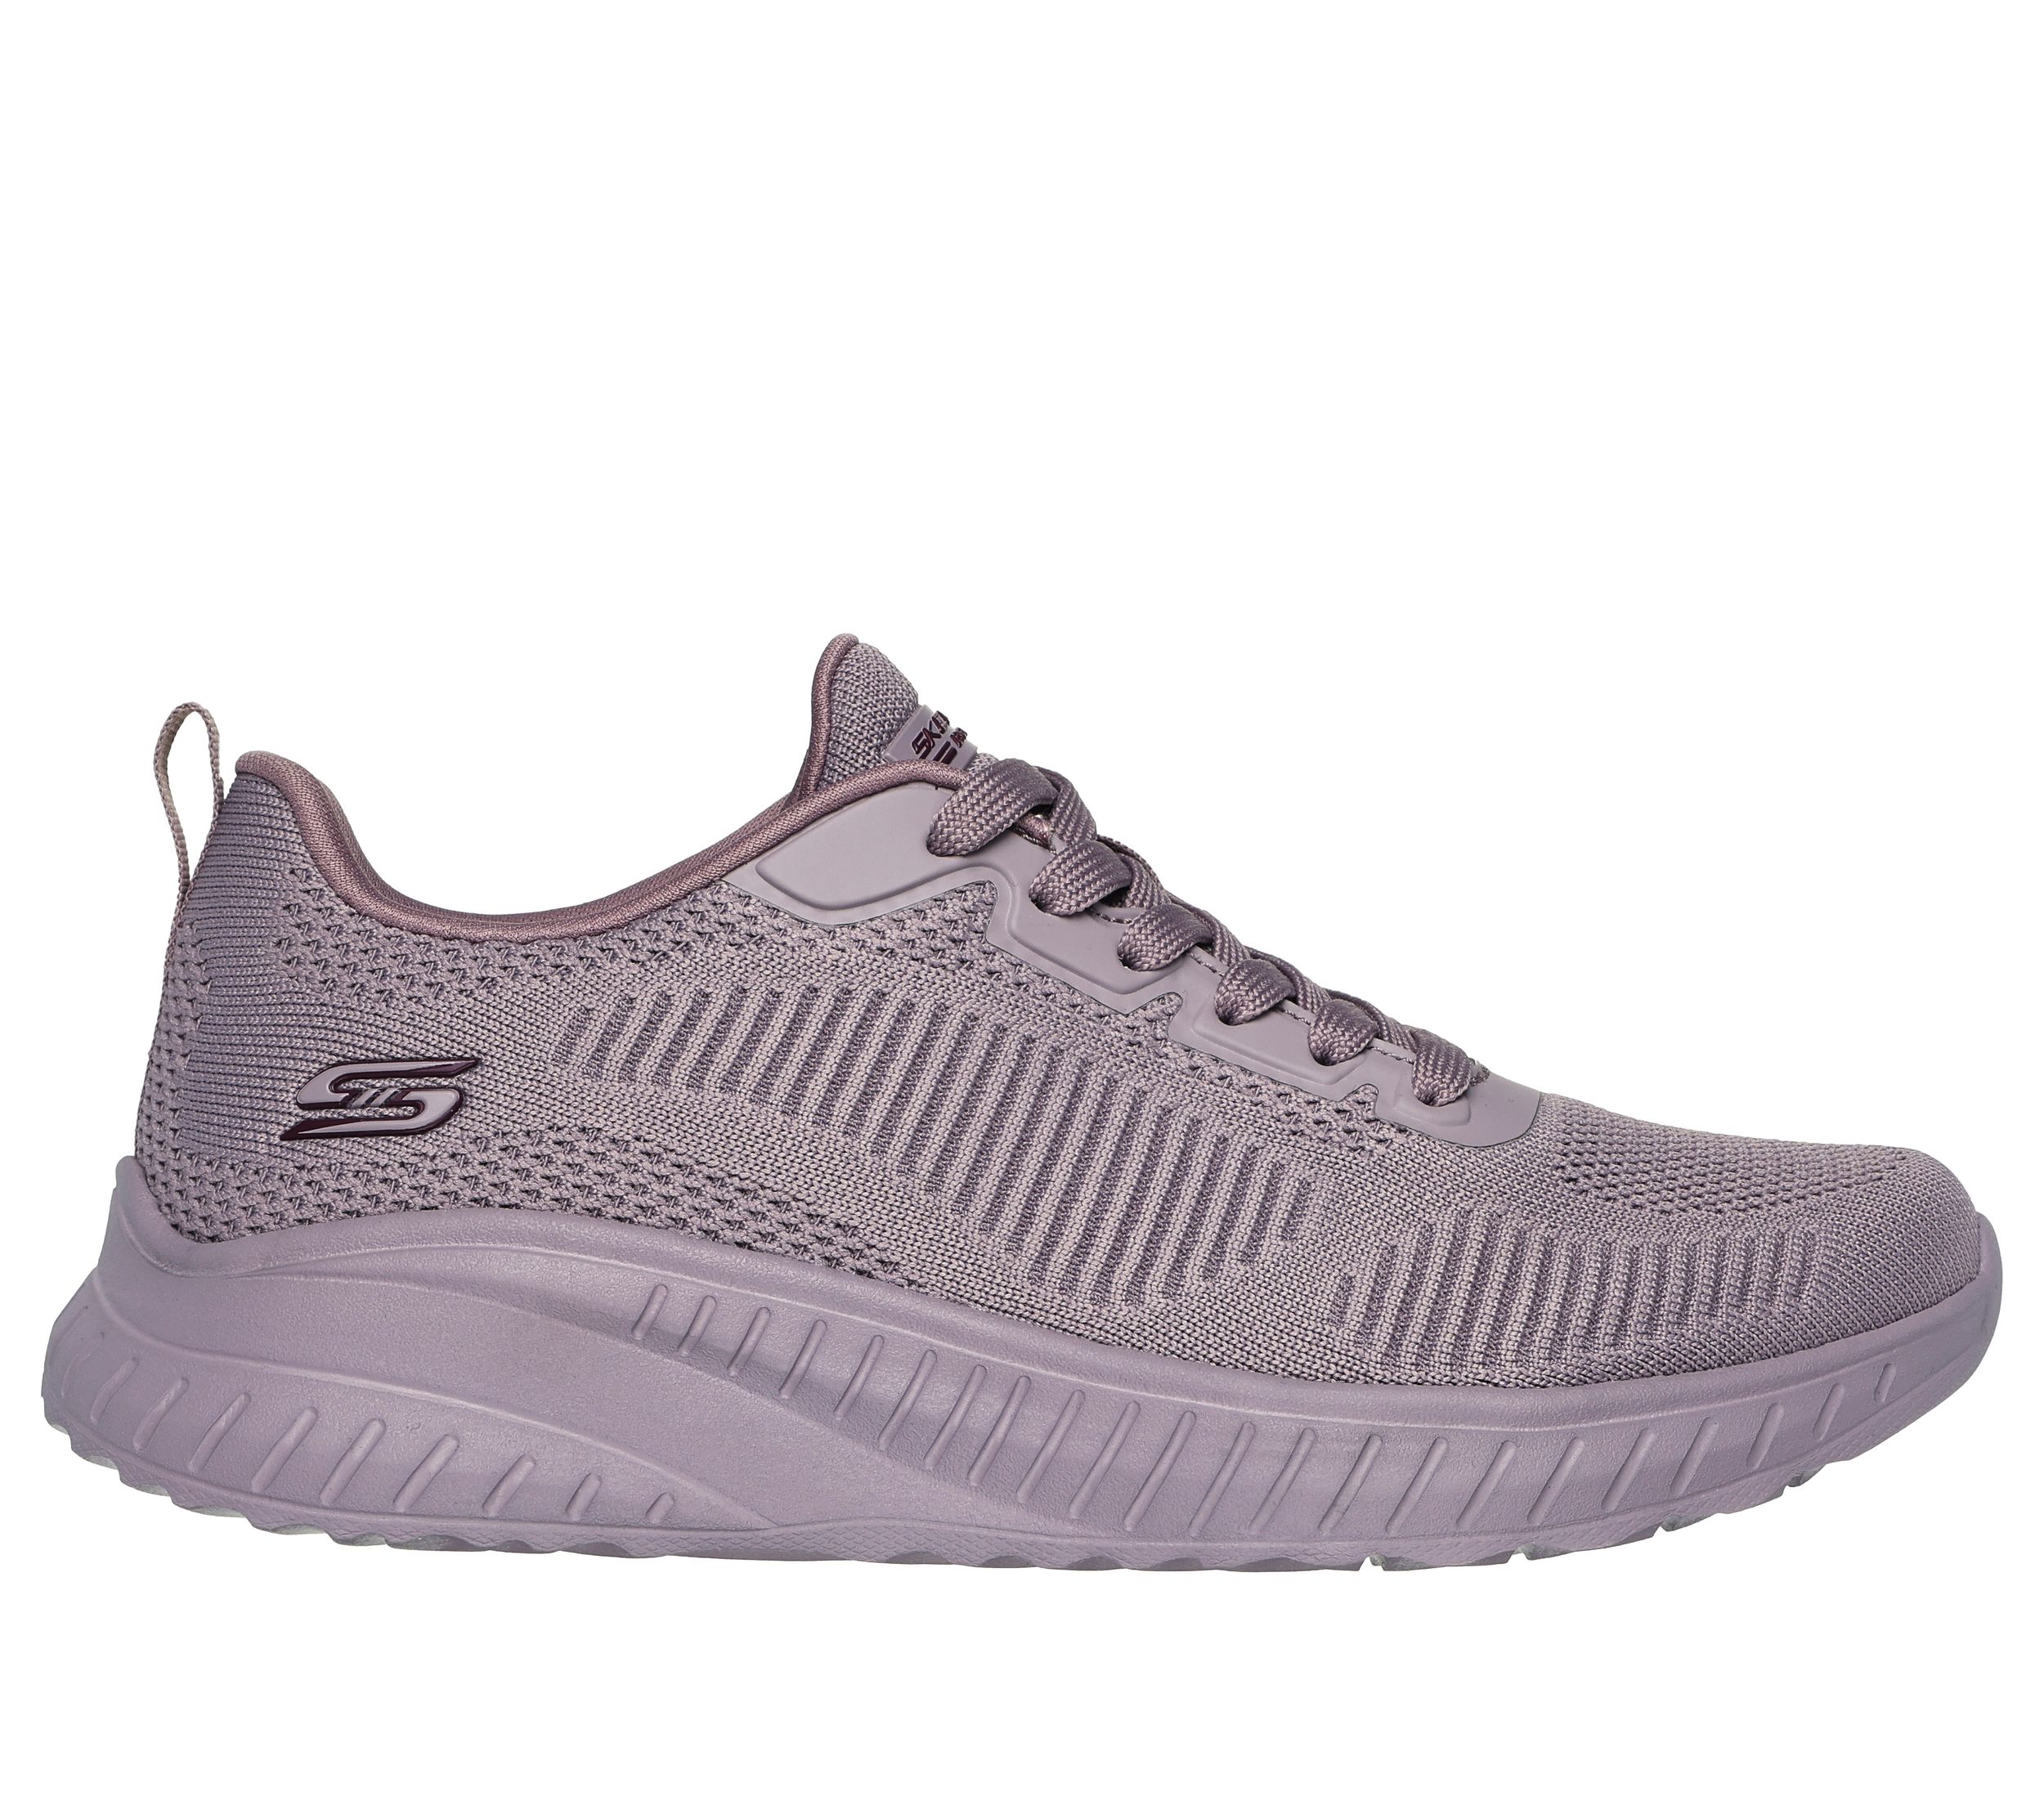 Image of Skechers Women's Bobs Sport Squad Chaos Walking Shoes